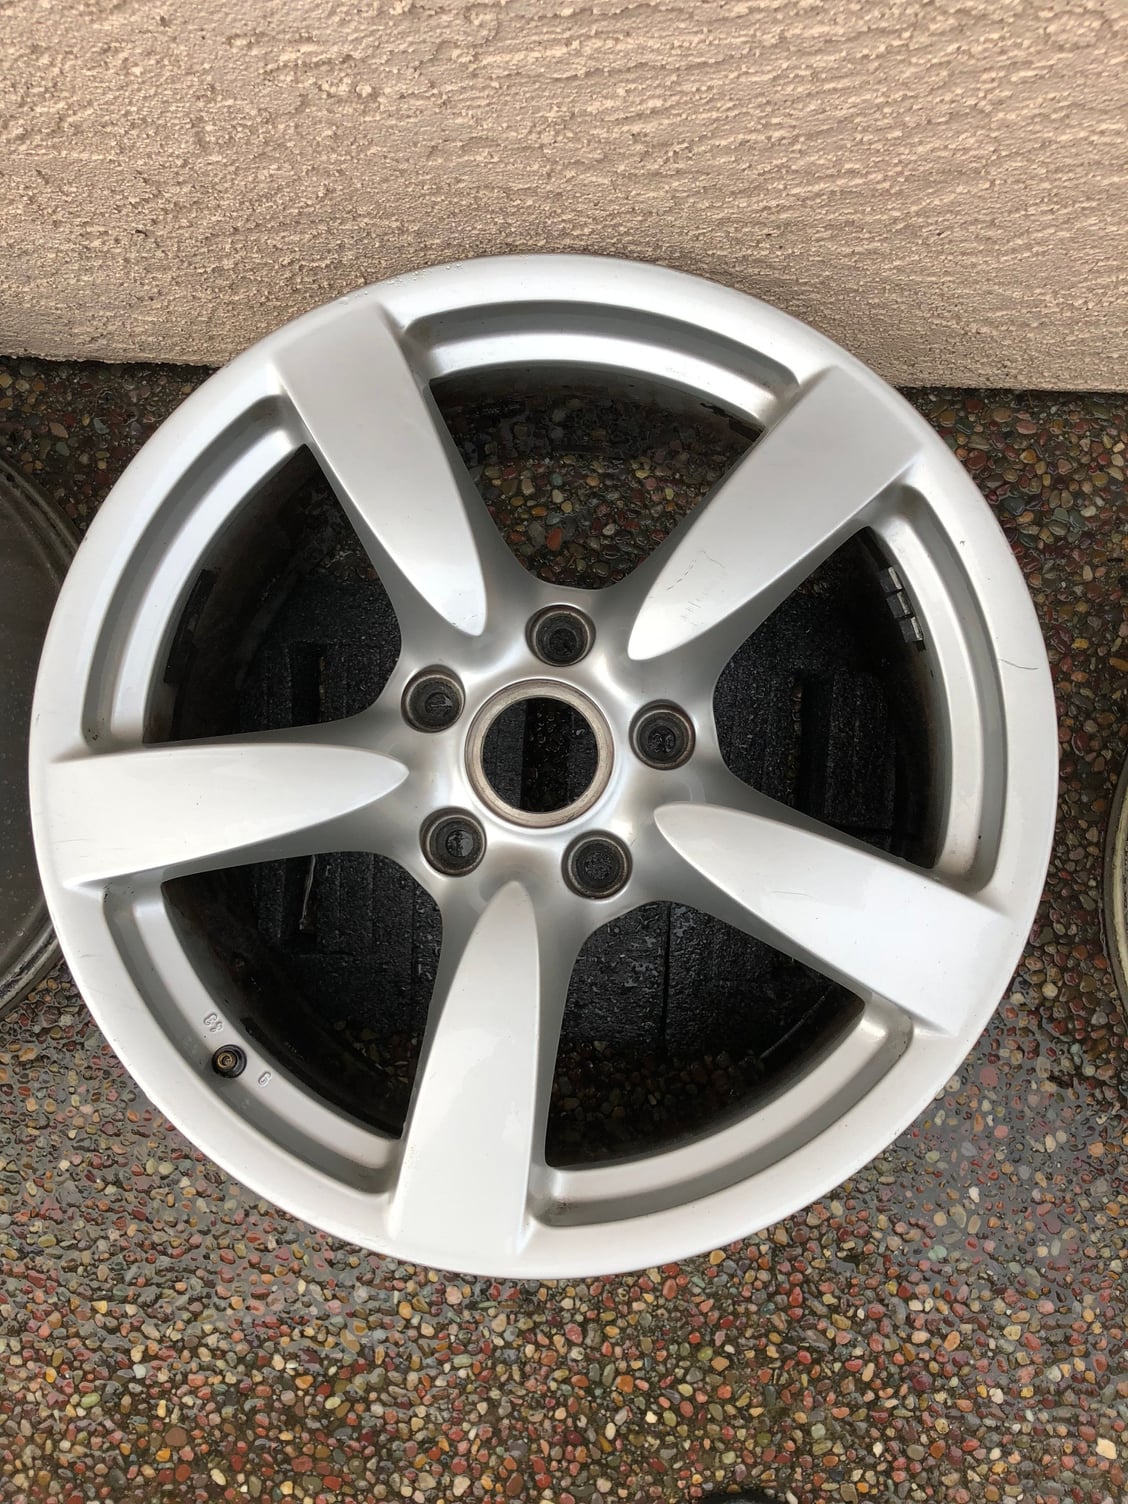 Wheels and Tires/Axles - Porsche Cayman Wheels - Used - 2006 to 2012 Porsche Cayman - Union City, CA 94587, United States